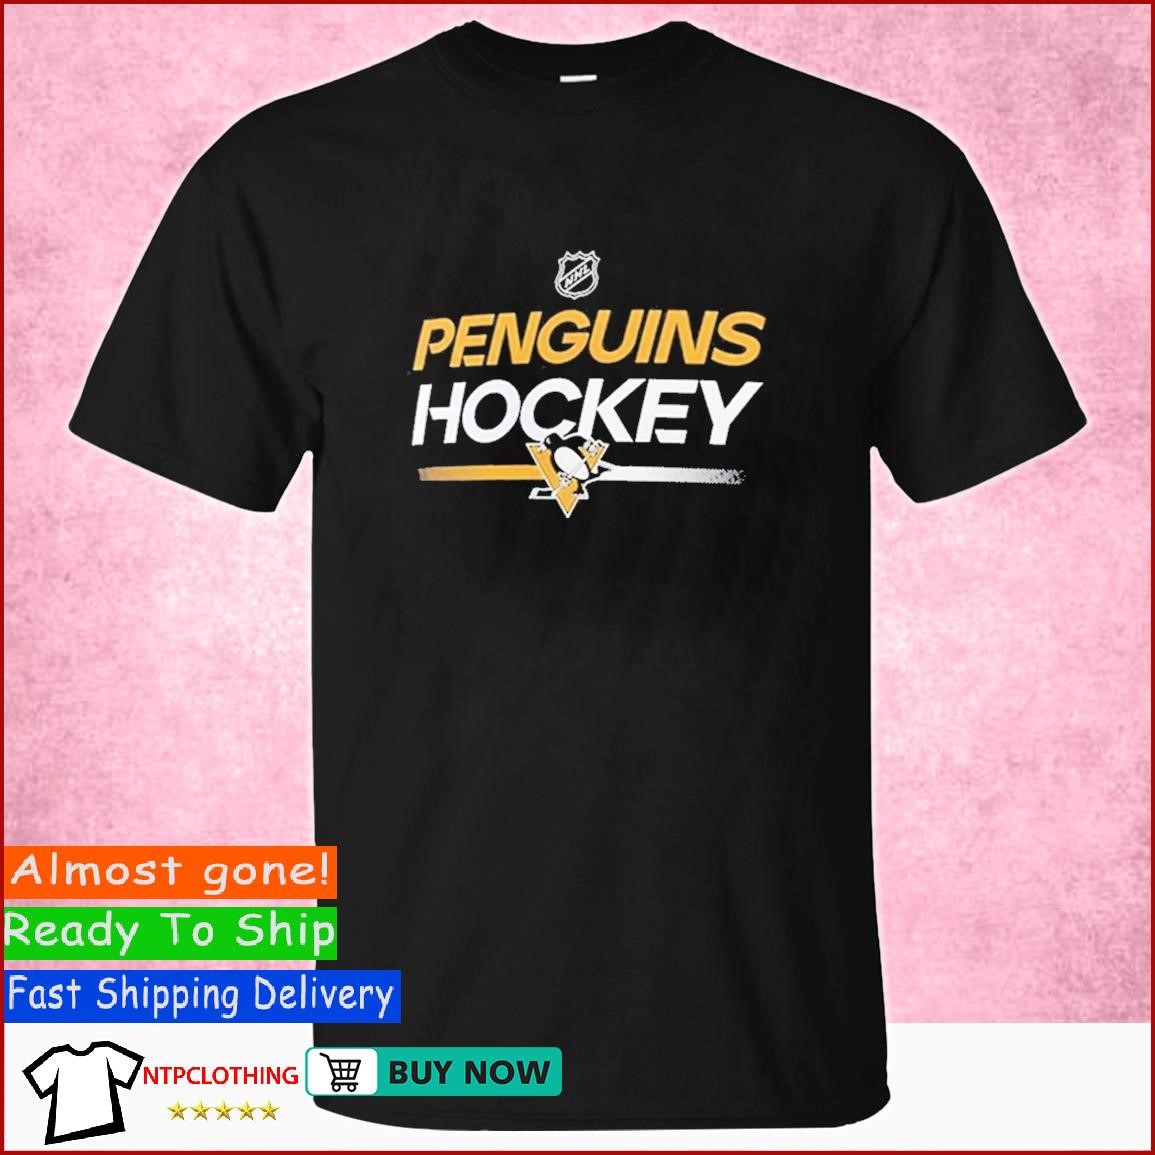 For Sale] I hear the Penguins are wearing Pittsburgh Pirates